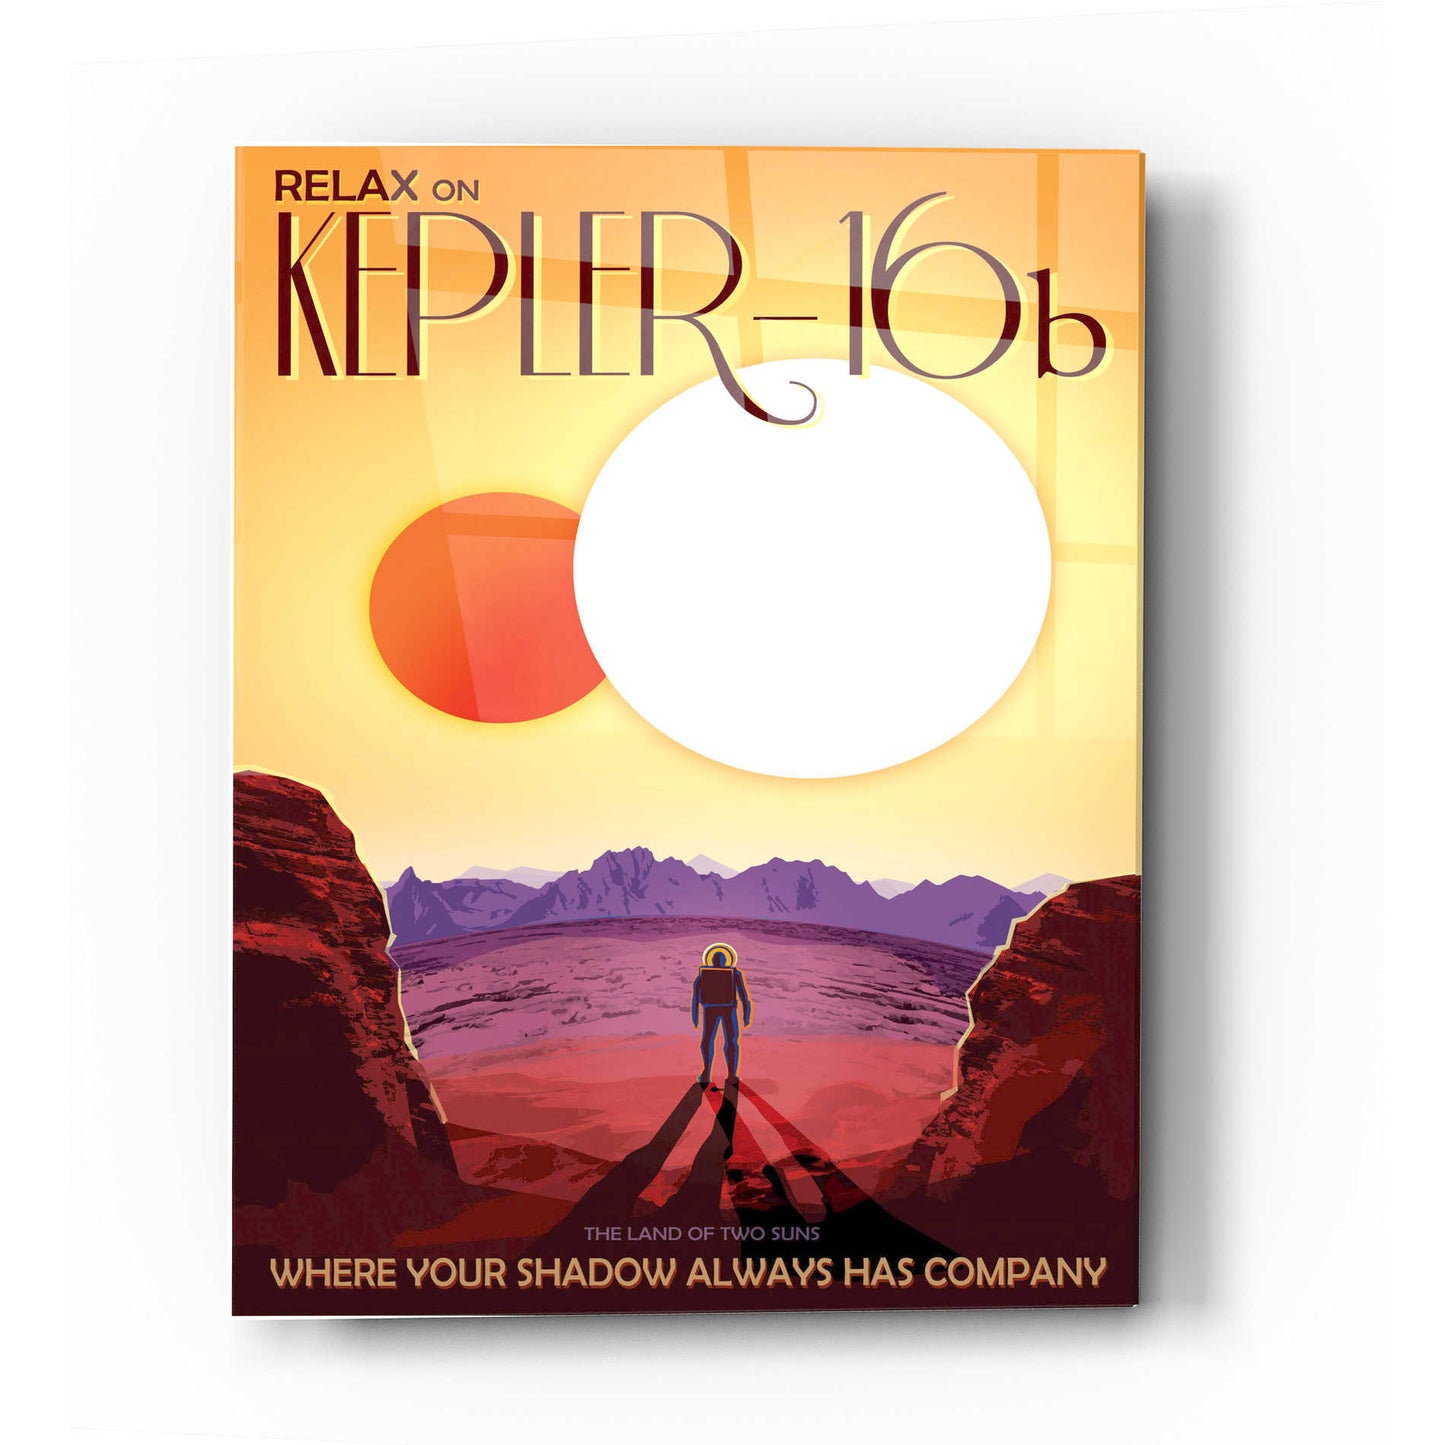 Epic Art 'Visions of the Future: Kepler-16b' Acrylic Glass Wall Art